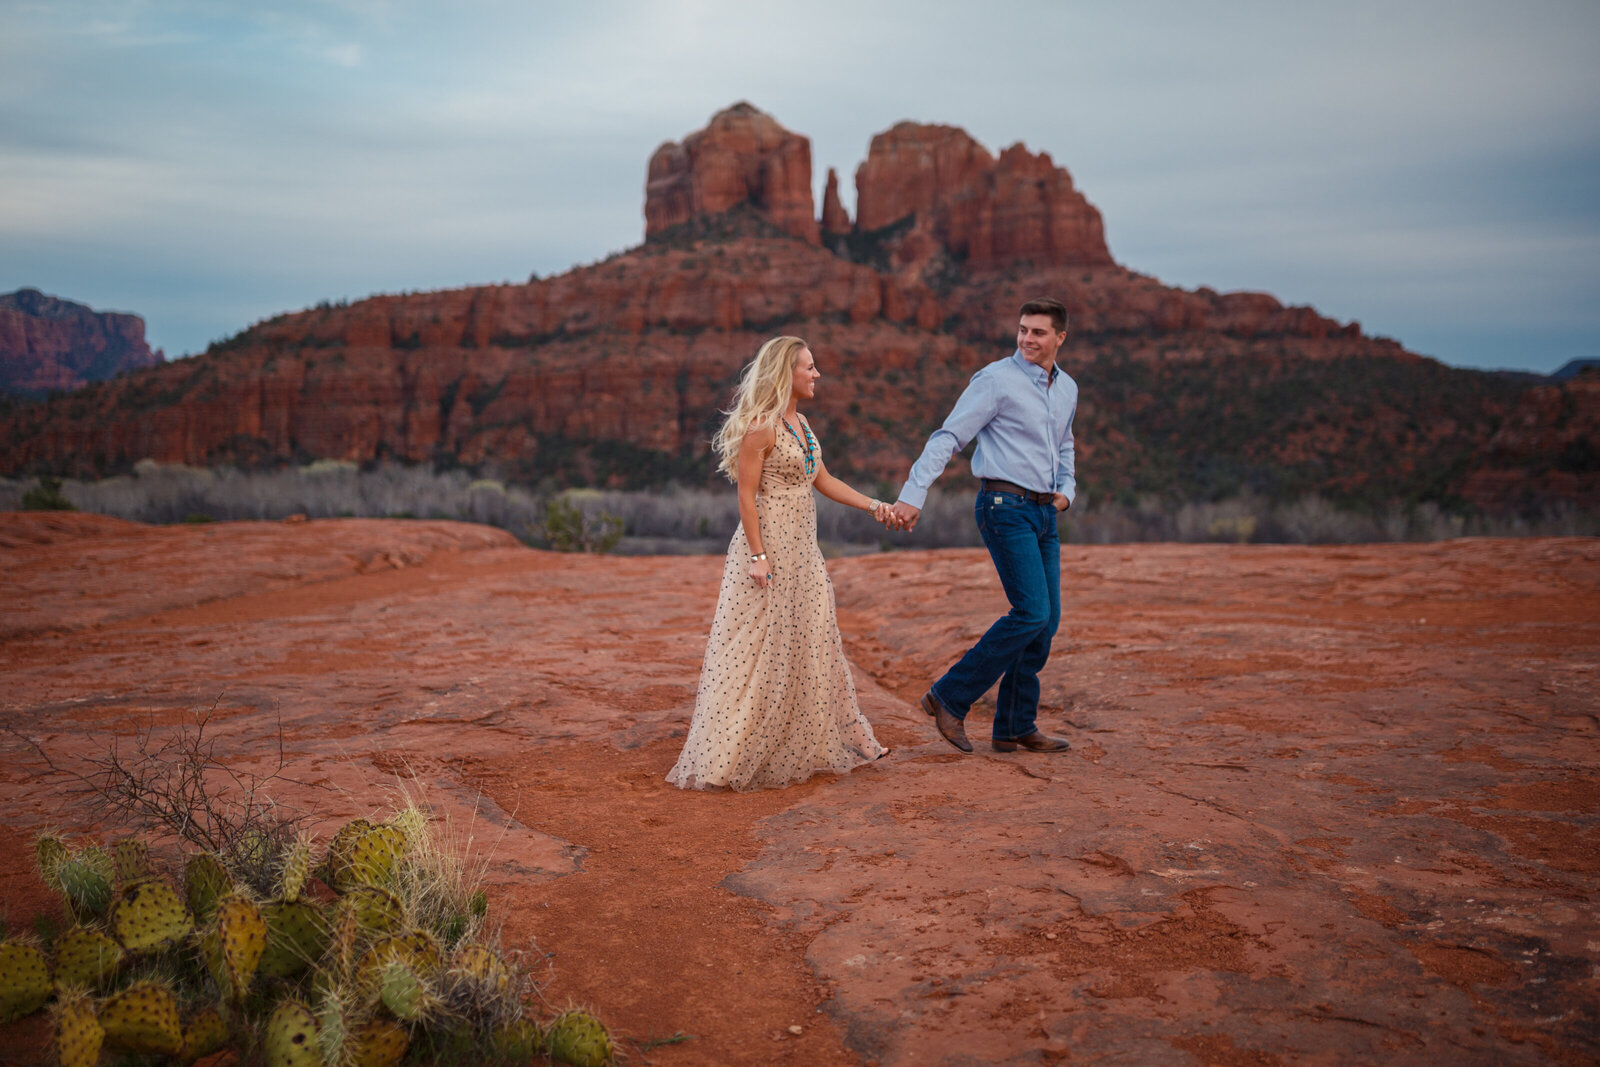 cathedral rock view in sedona for couples photos